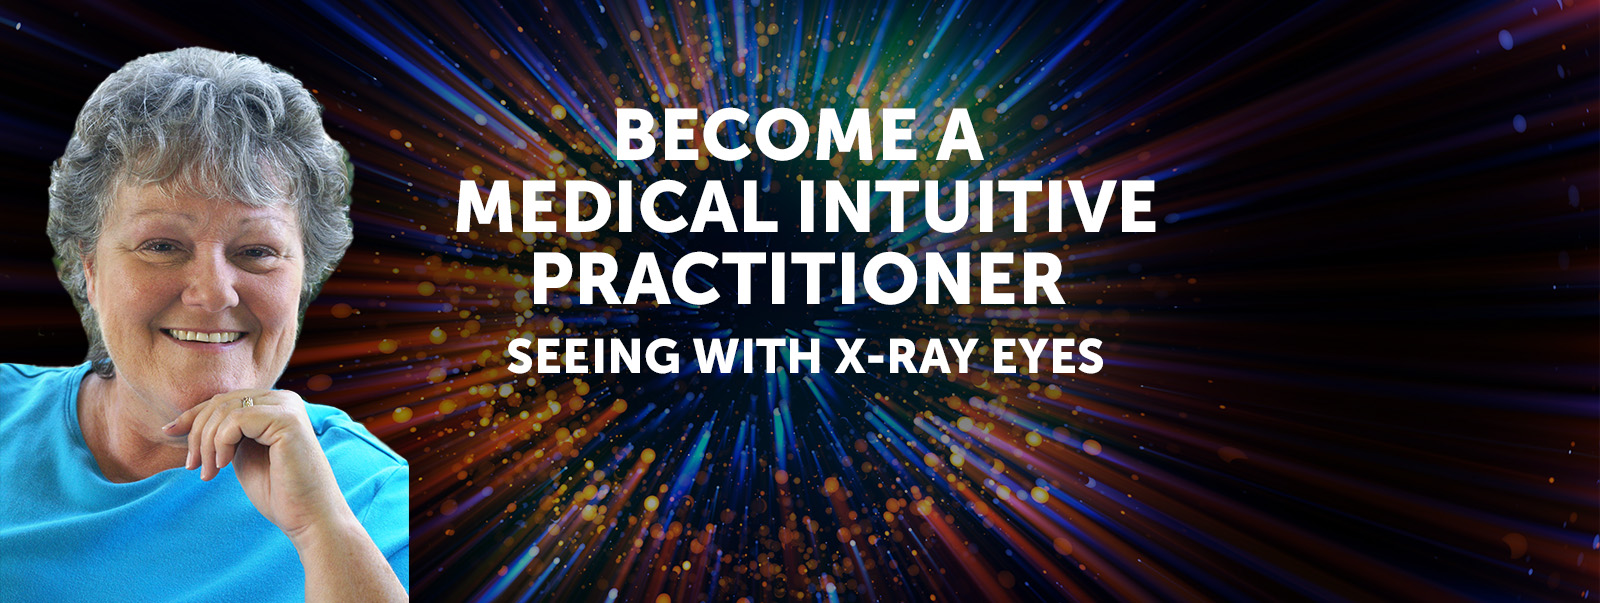 header banner Become A Medical Intuitive Practitioner Seeing With X-Ray Eyes Tina Zion headshot rainbow burst of colors background